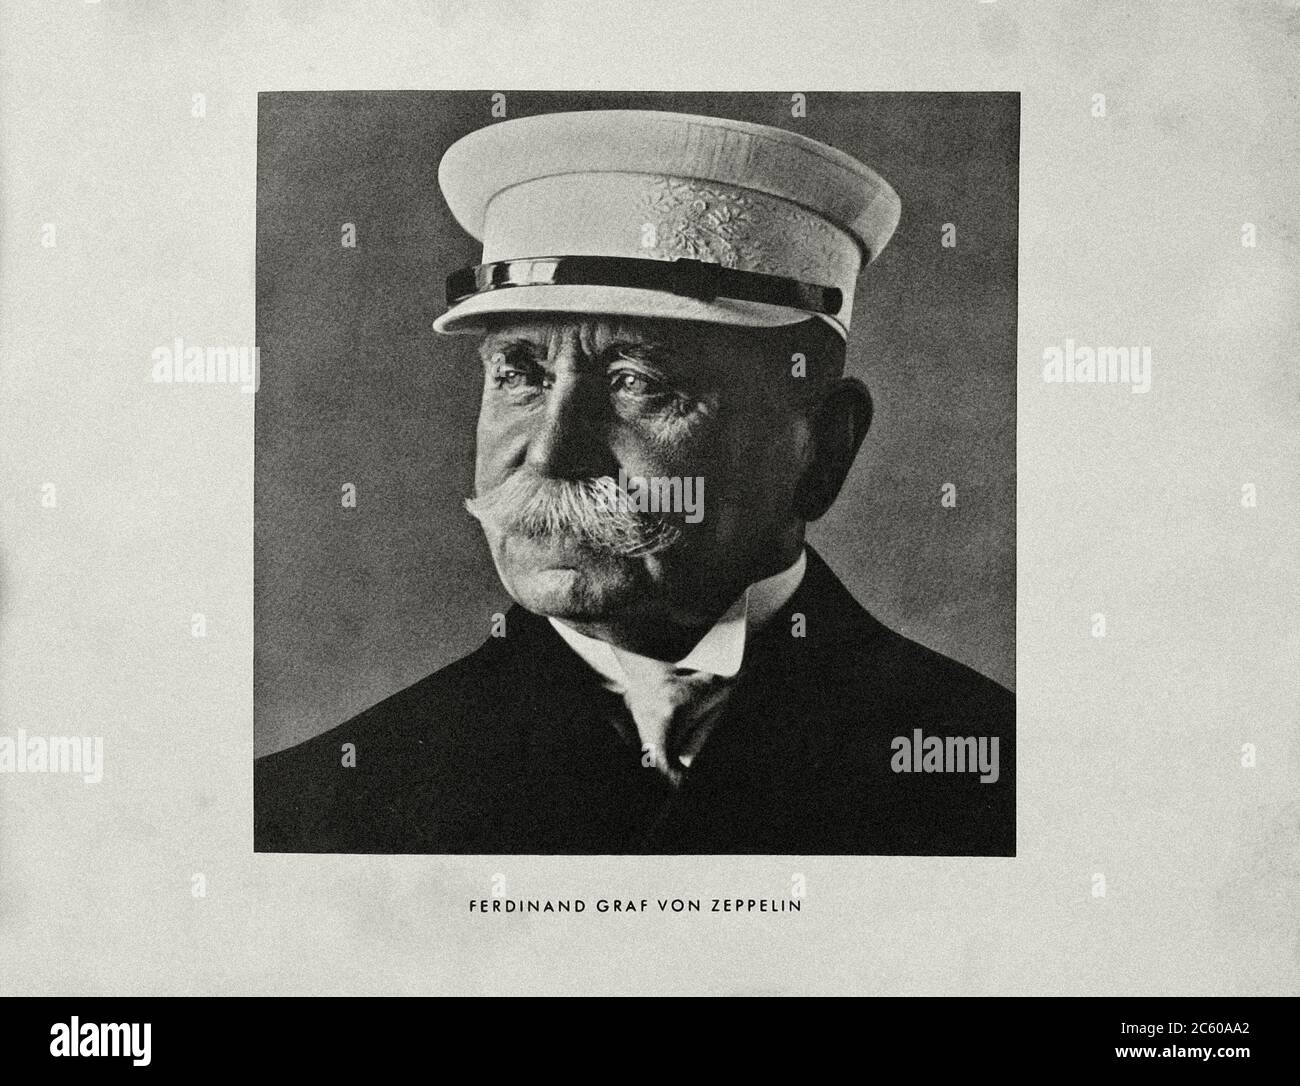 Ferdinand Adolf Heinrich August Graf von Zeppelin (1838 – 1917) was a German general and later inventor of the Zeppelin rigid airships; he founded the Stock Photo